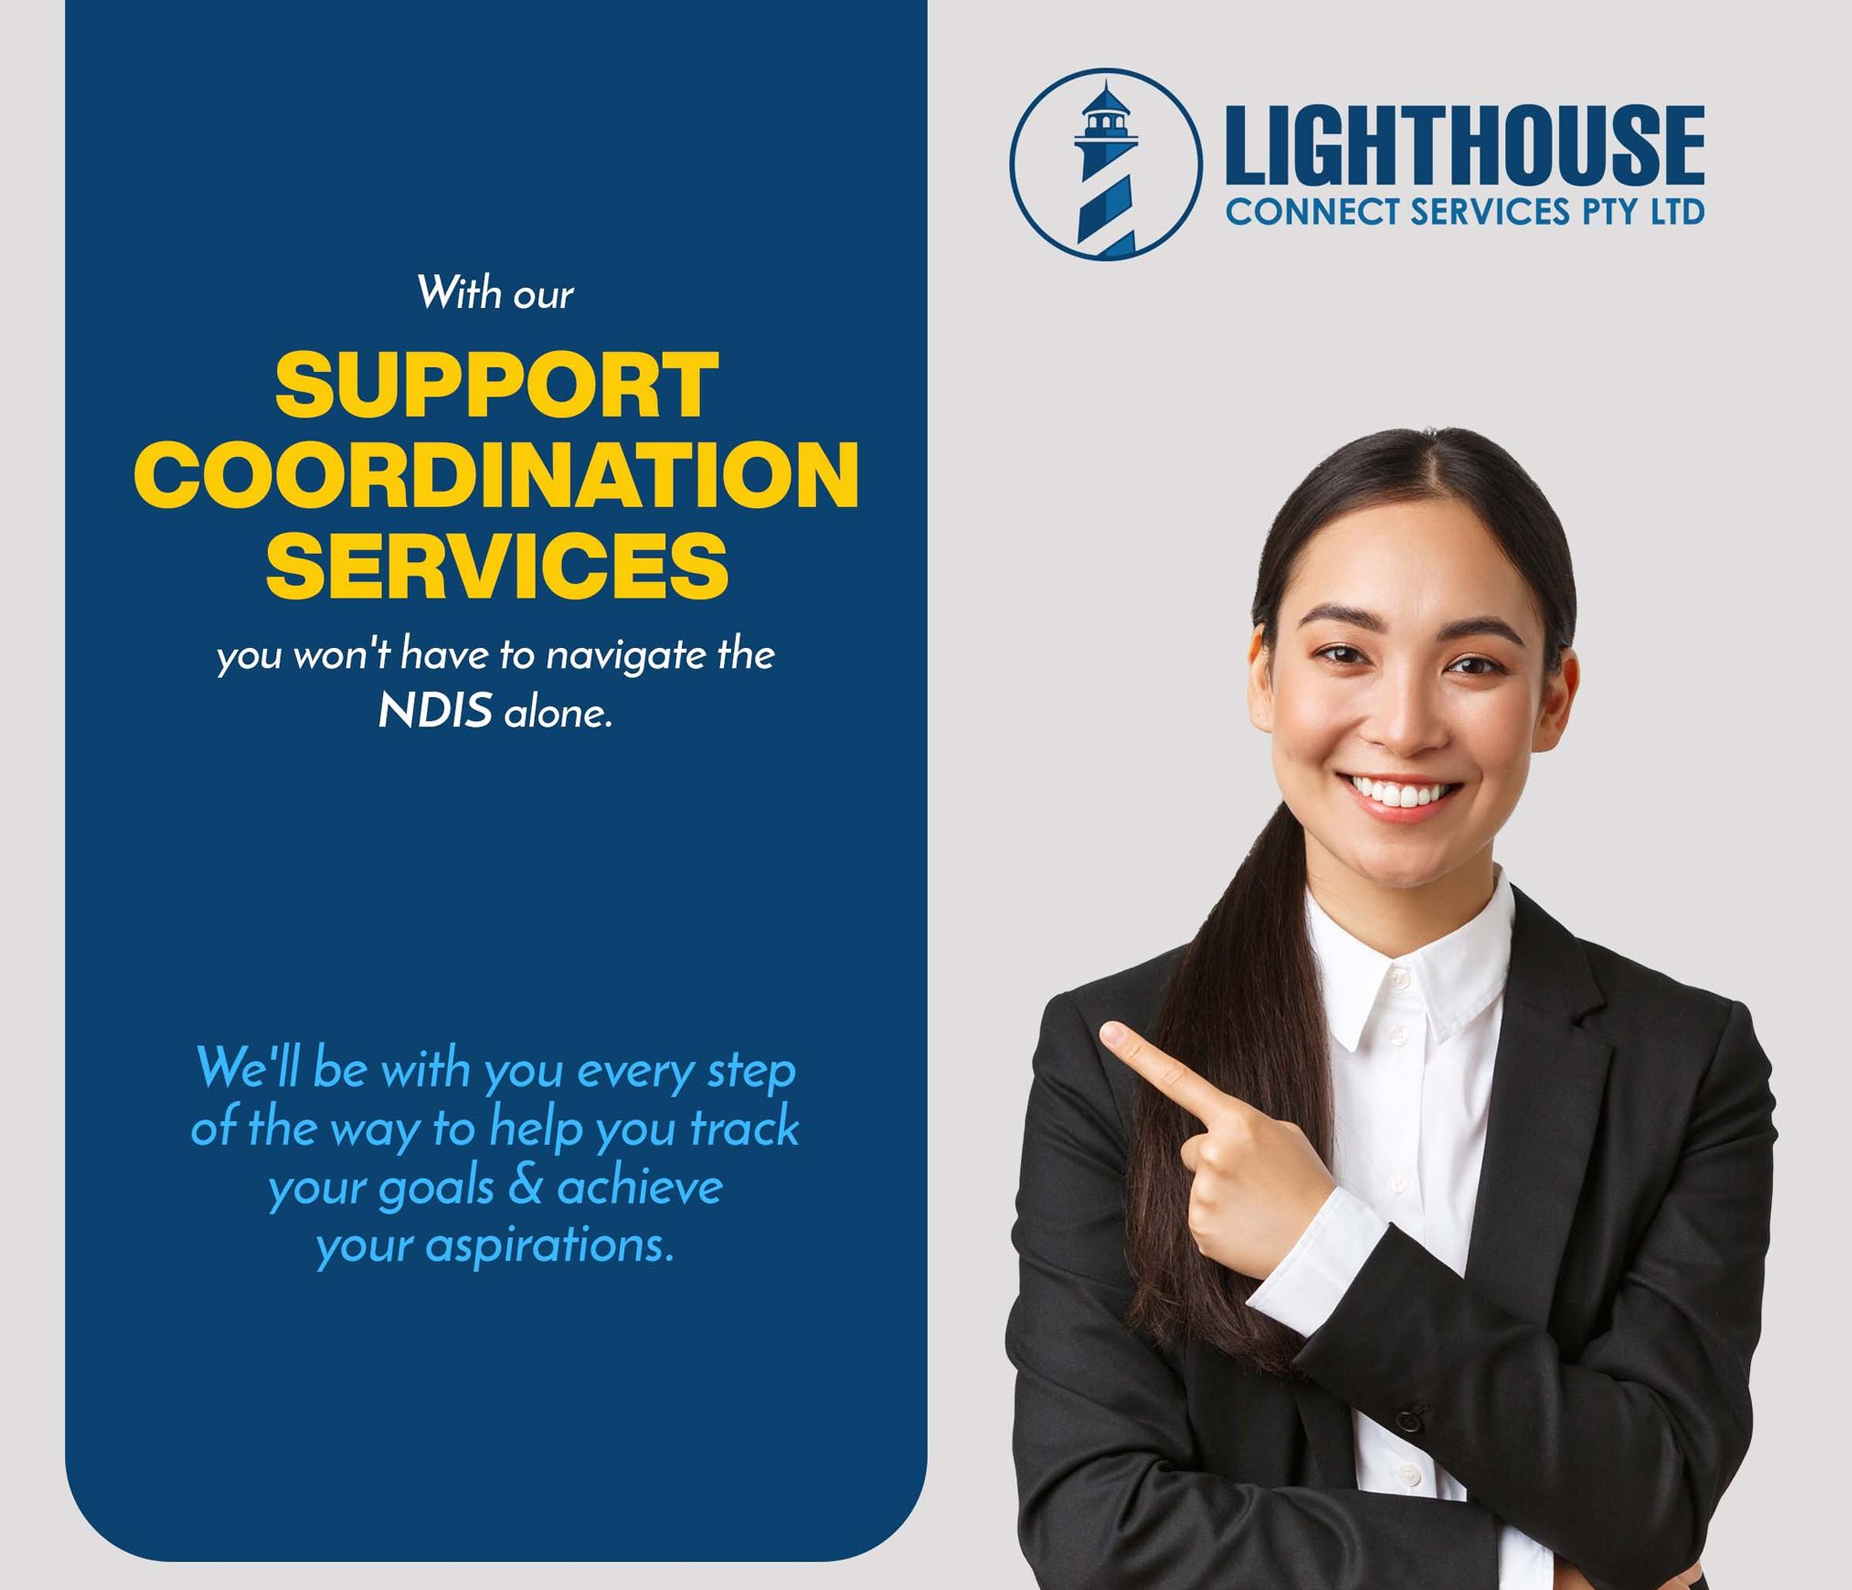 <h5></h5>
<h5 style="text-align: center;"><strong>LIGHTHOUSE CONNECT SERVICES</strong><br />
(NDIS Registered Service Provider)</h5>
